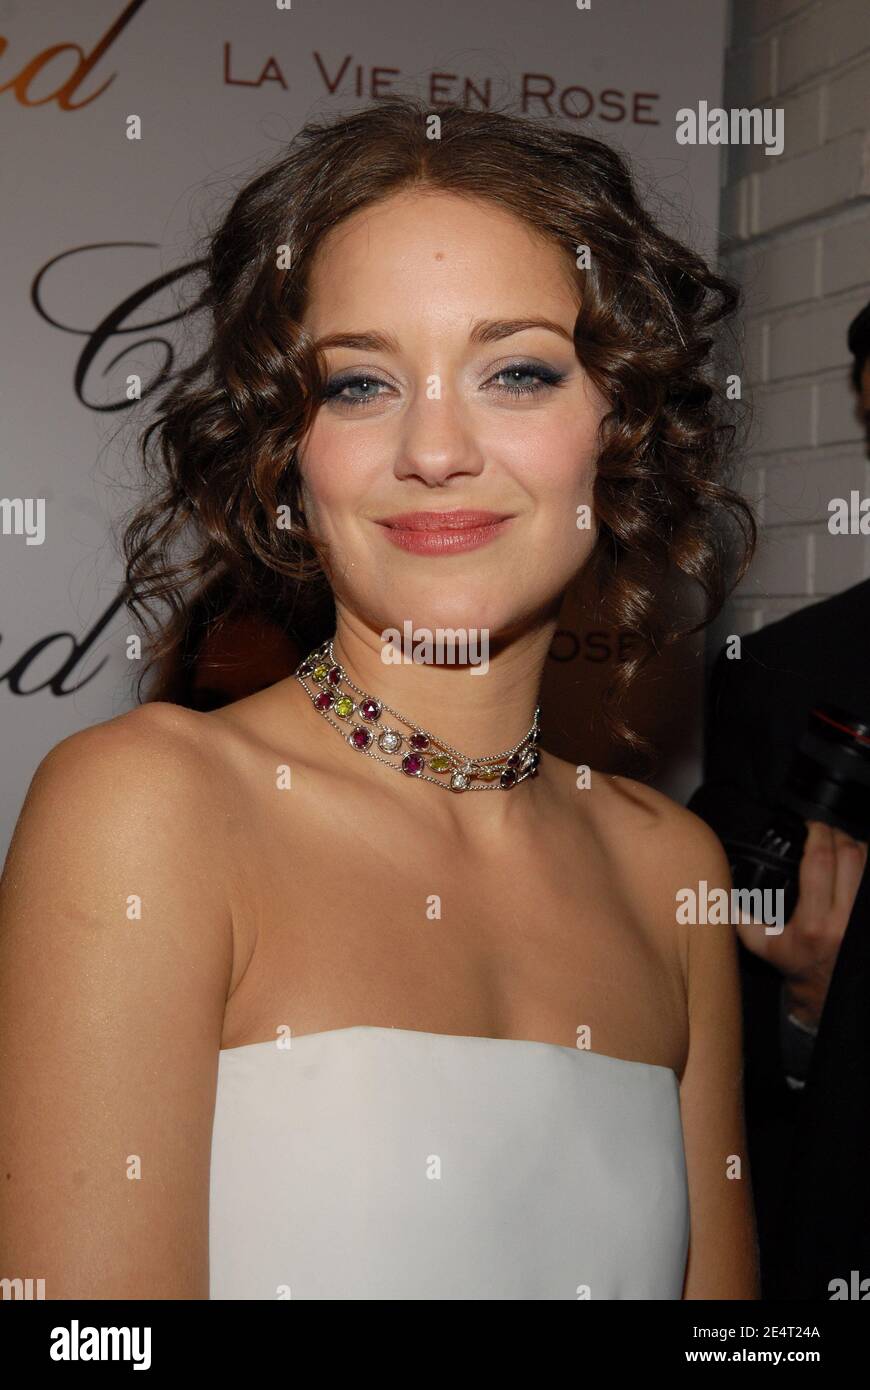 Marion Cotillard attends a party honoring her Academy Award Nomination for best actress in a leading role for her performance in 'La Vie en Rose'. Chateau Marmont, West Hollywood. Los Angeles, February 4, 2008. (Pictured: Marion Cotillard). Photo by Lionel Hahn/ABACAPRESS.COM Stock Photo